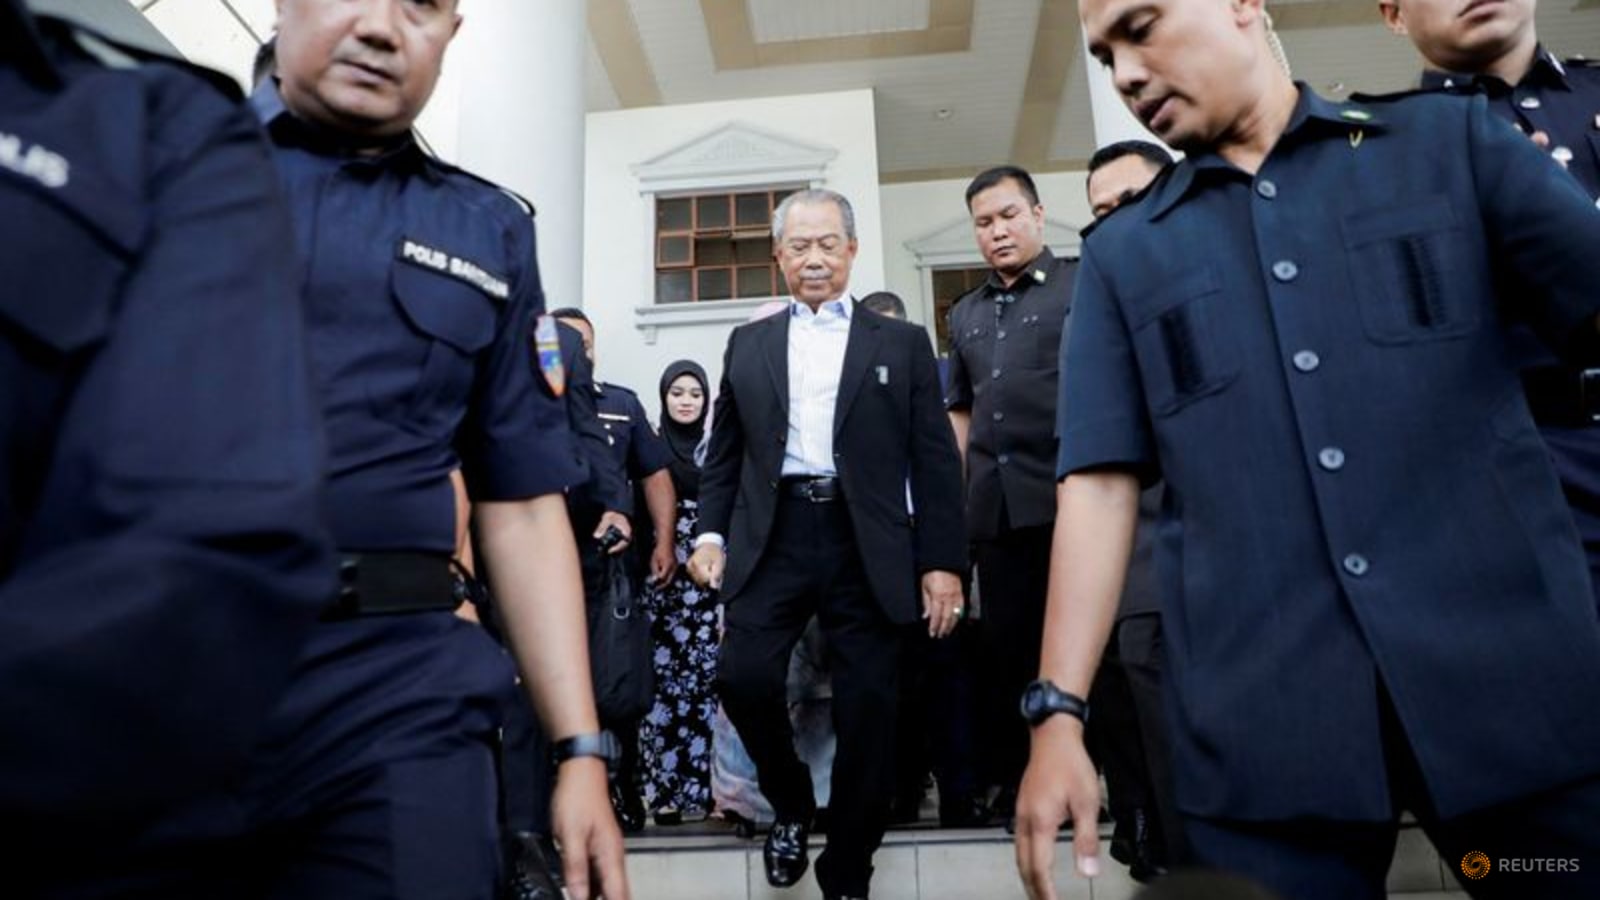 snap-insight:-muhyiddin’s-prosecution-puts-focus-on-sentiment-among-the-country’s-dominant-malays